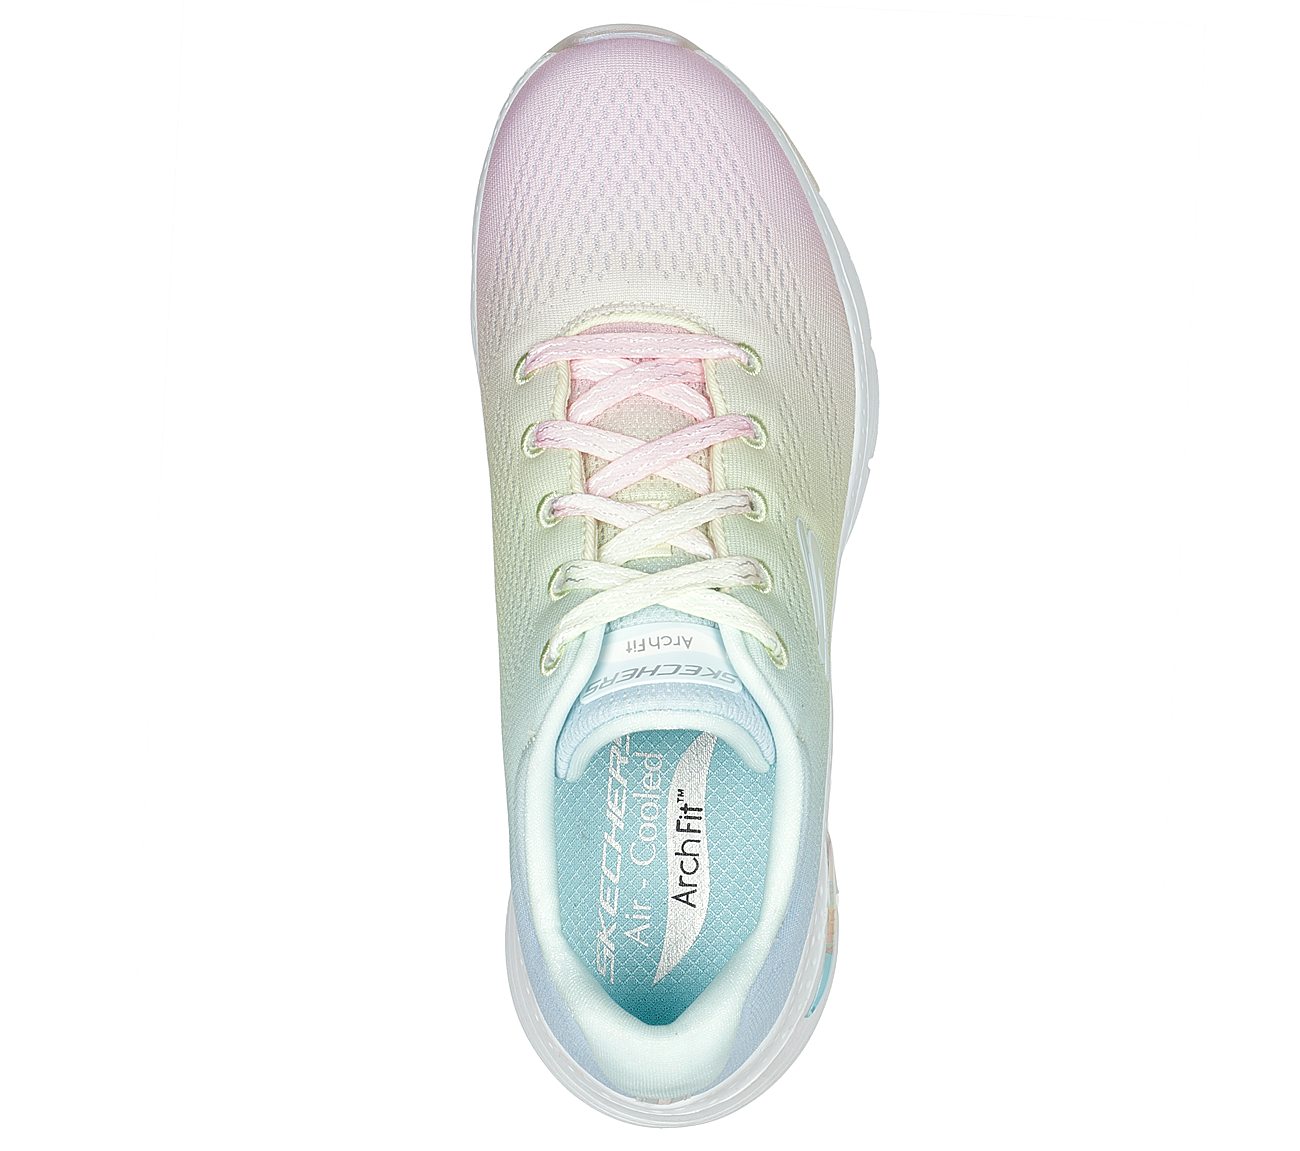 ARCH FIT-DREAMY DAY, MMULTI Footwear Top View